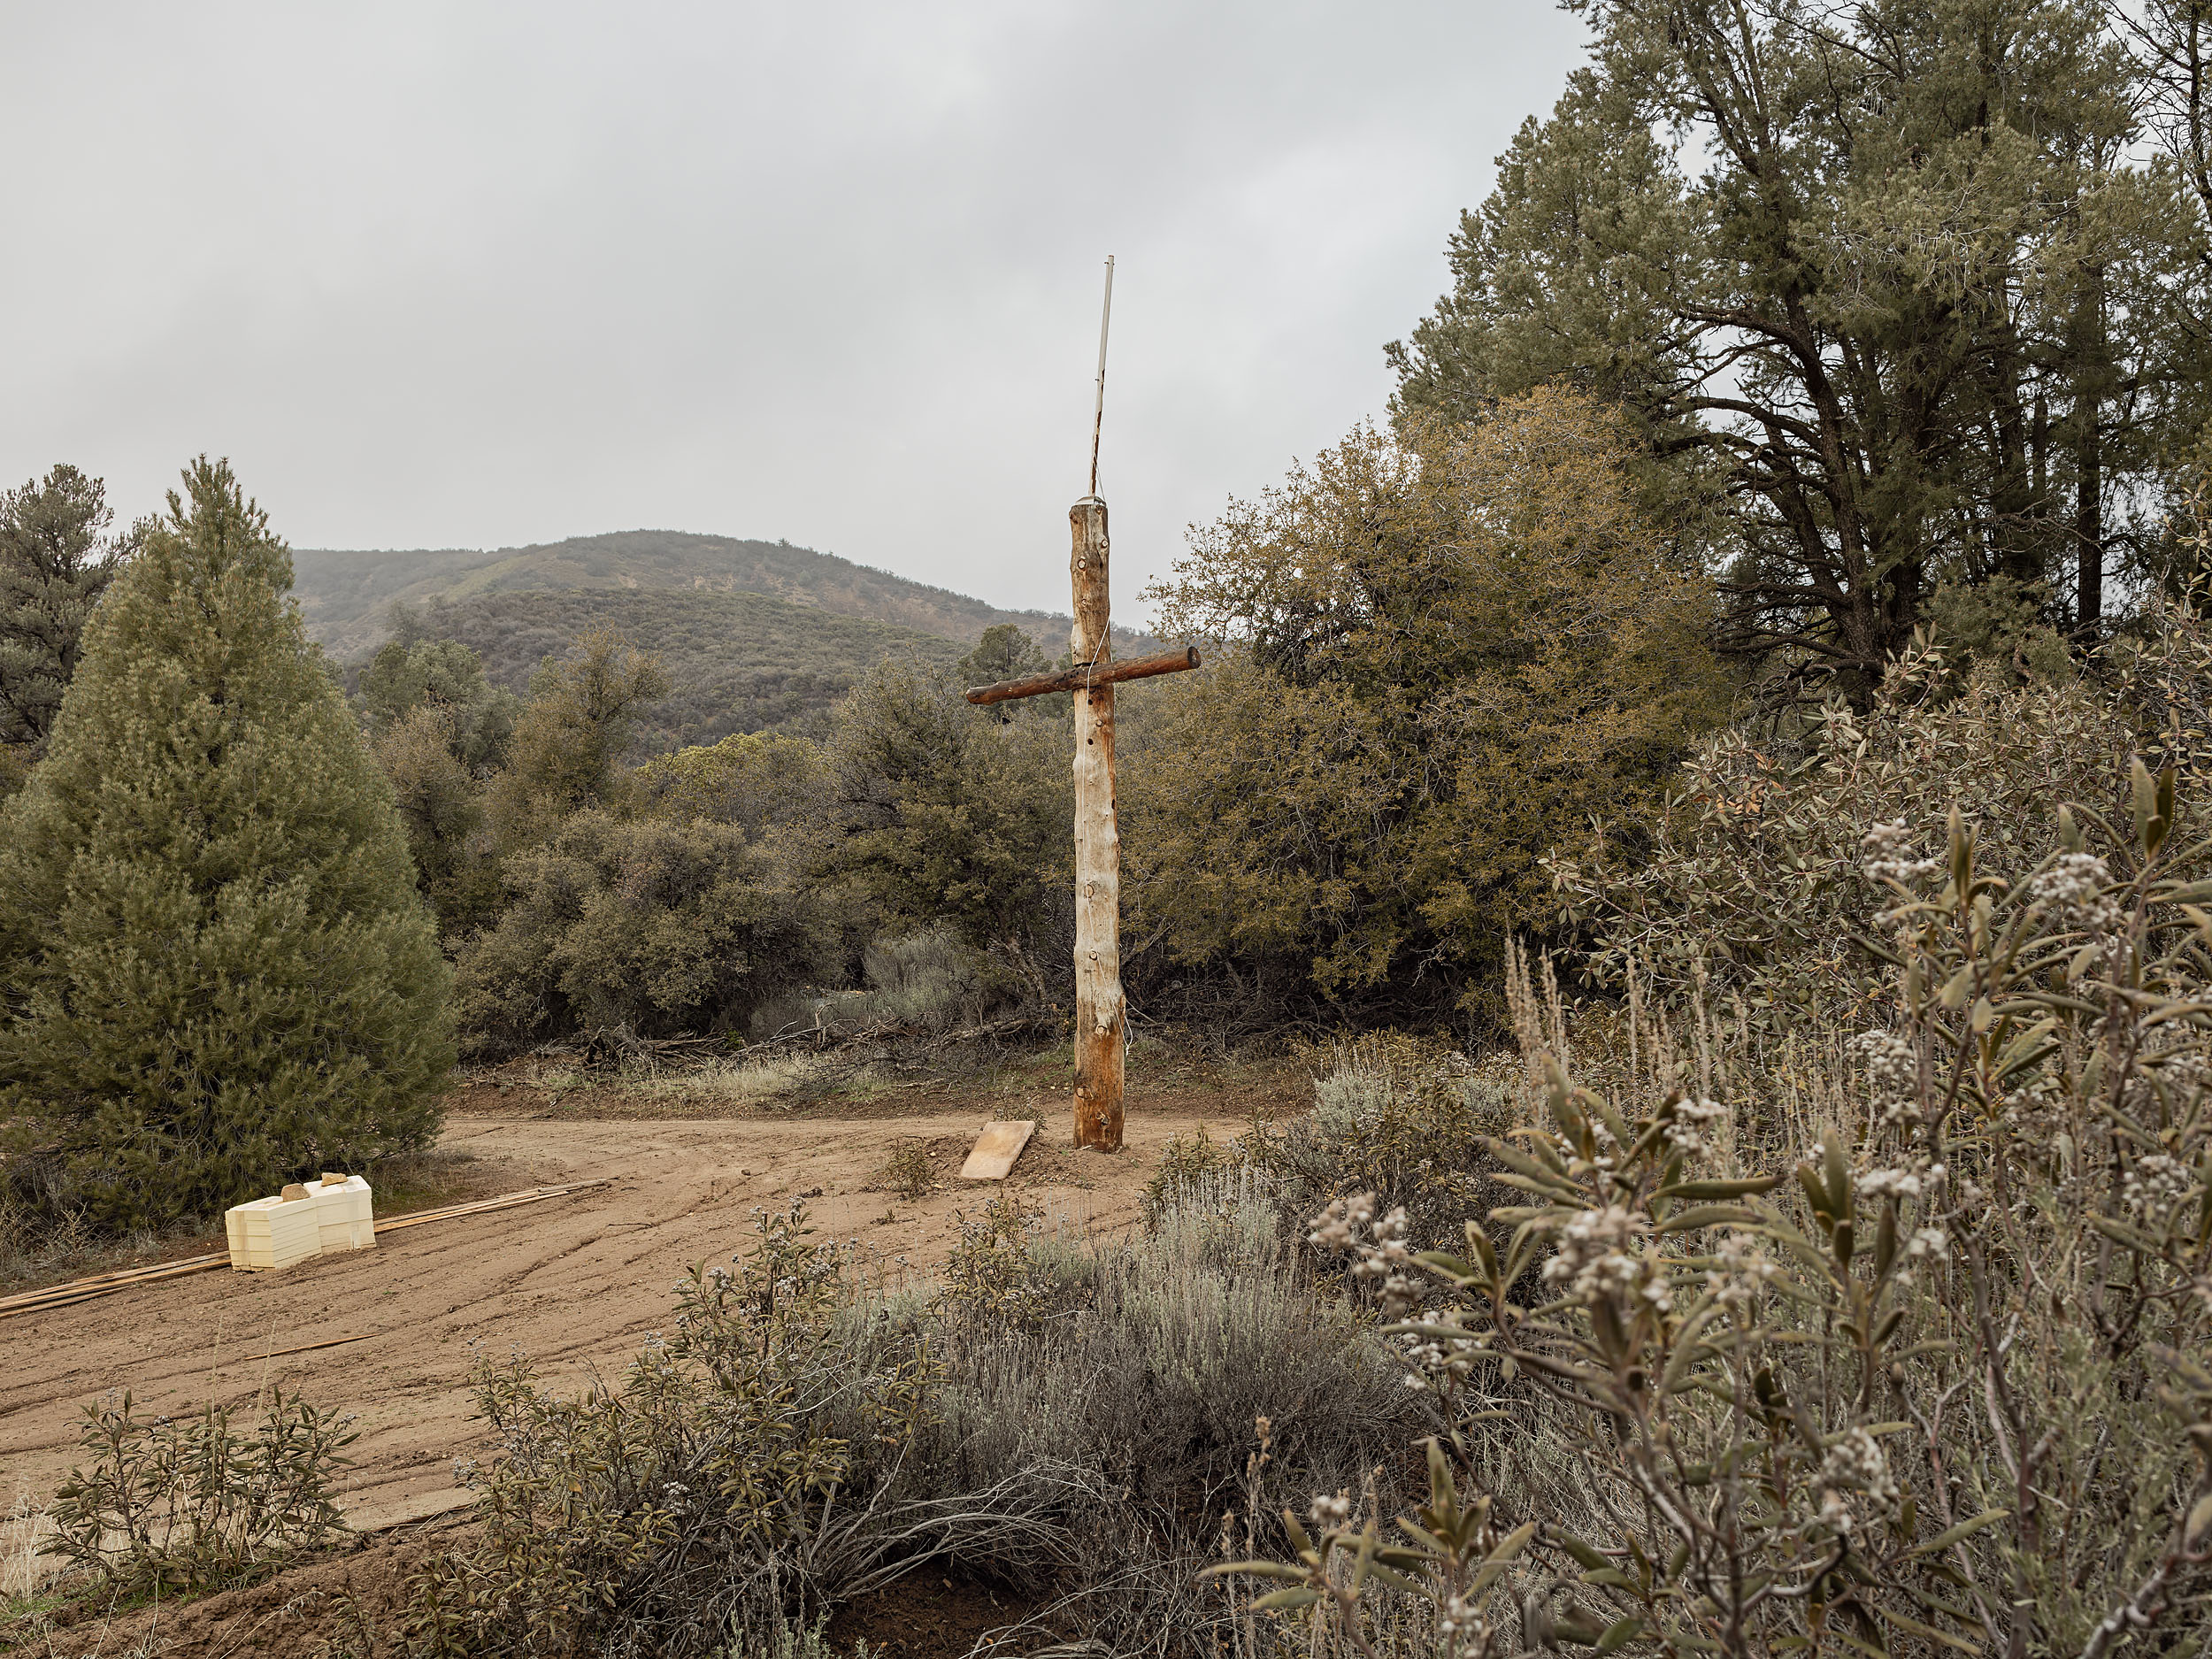 Cross, antenna, and/or flagpole along SR-33 - Los Padres National Forest, CA